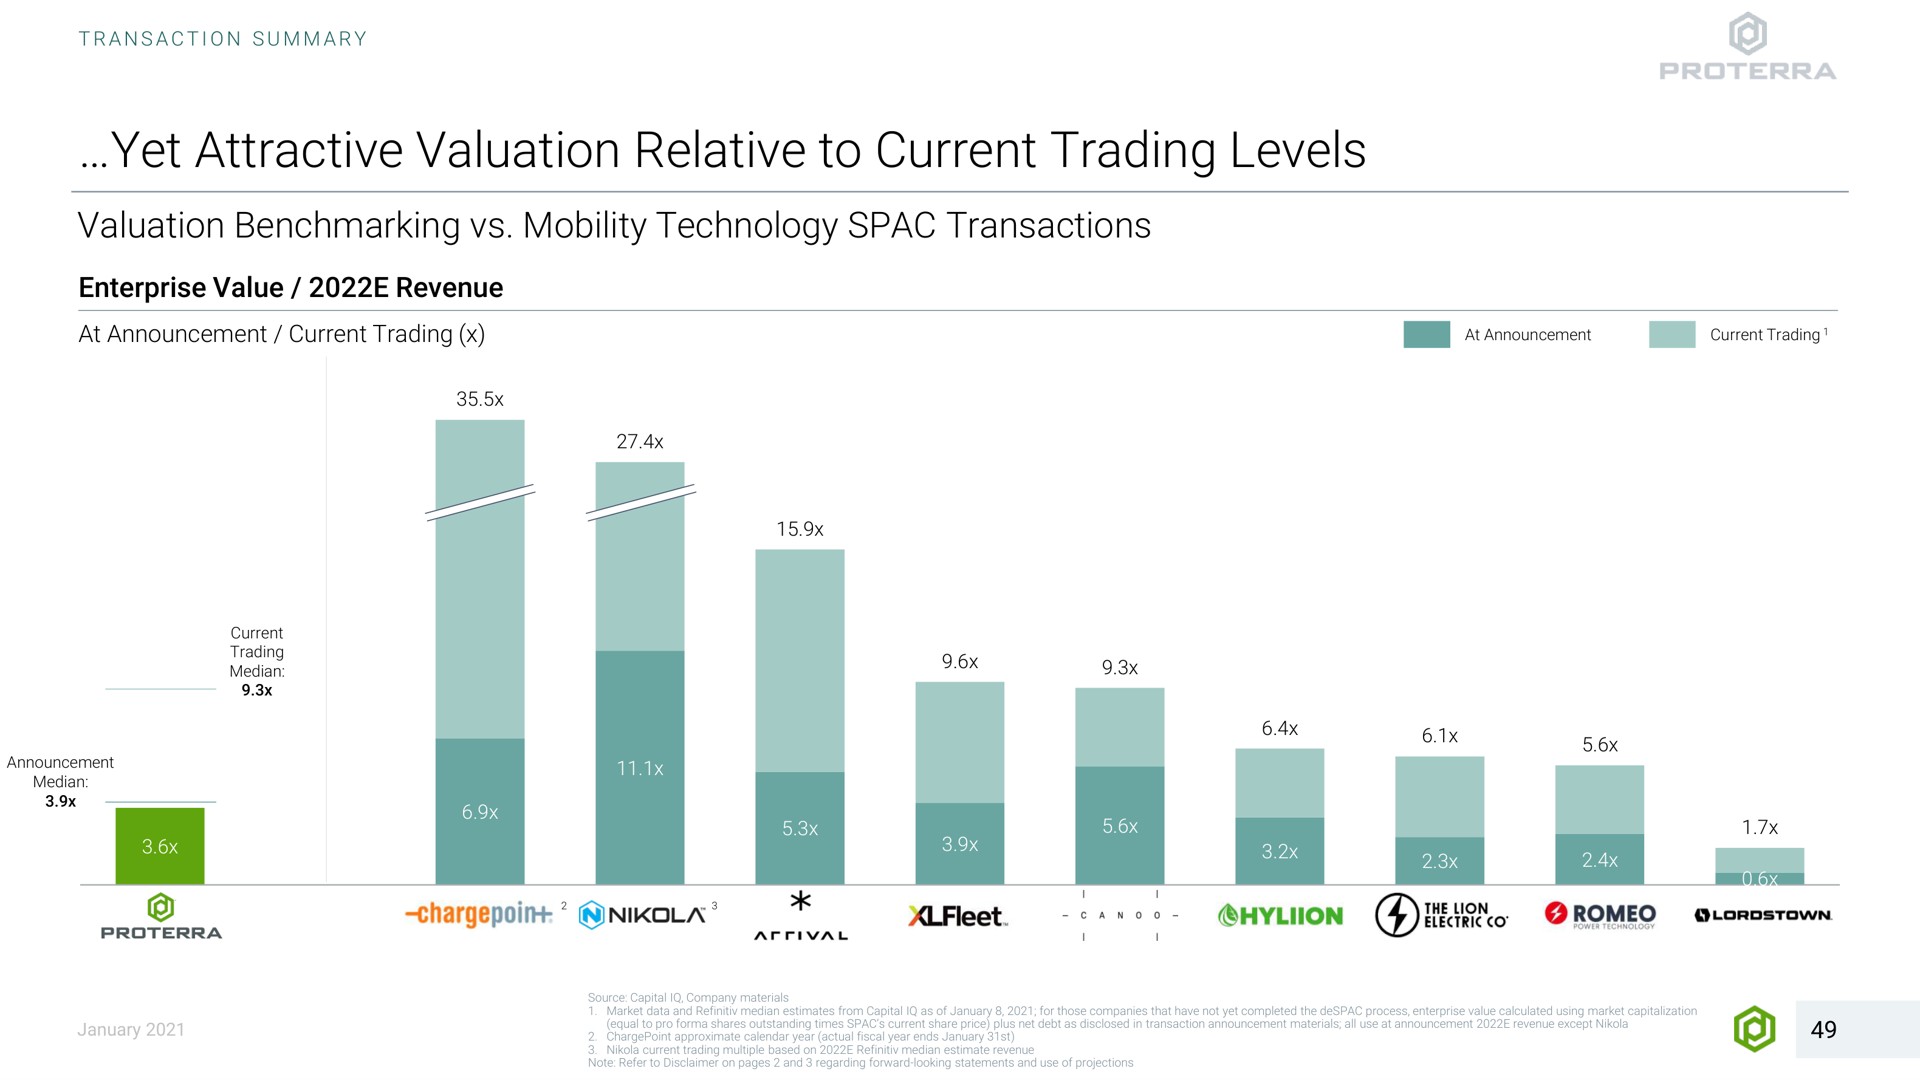 yet attractive valuation relative to current trading levels mobility technology transactions enterprise value revenue at announcement announcement median oes owes the lion | Proterra